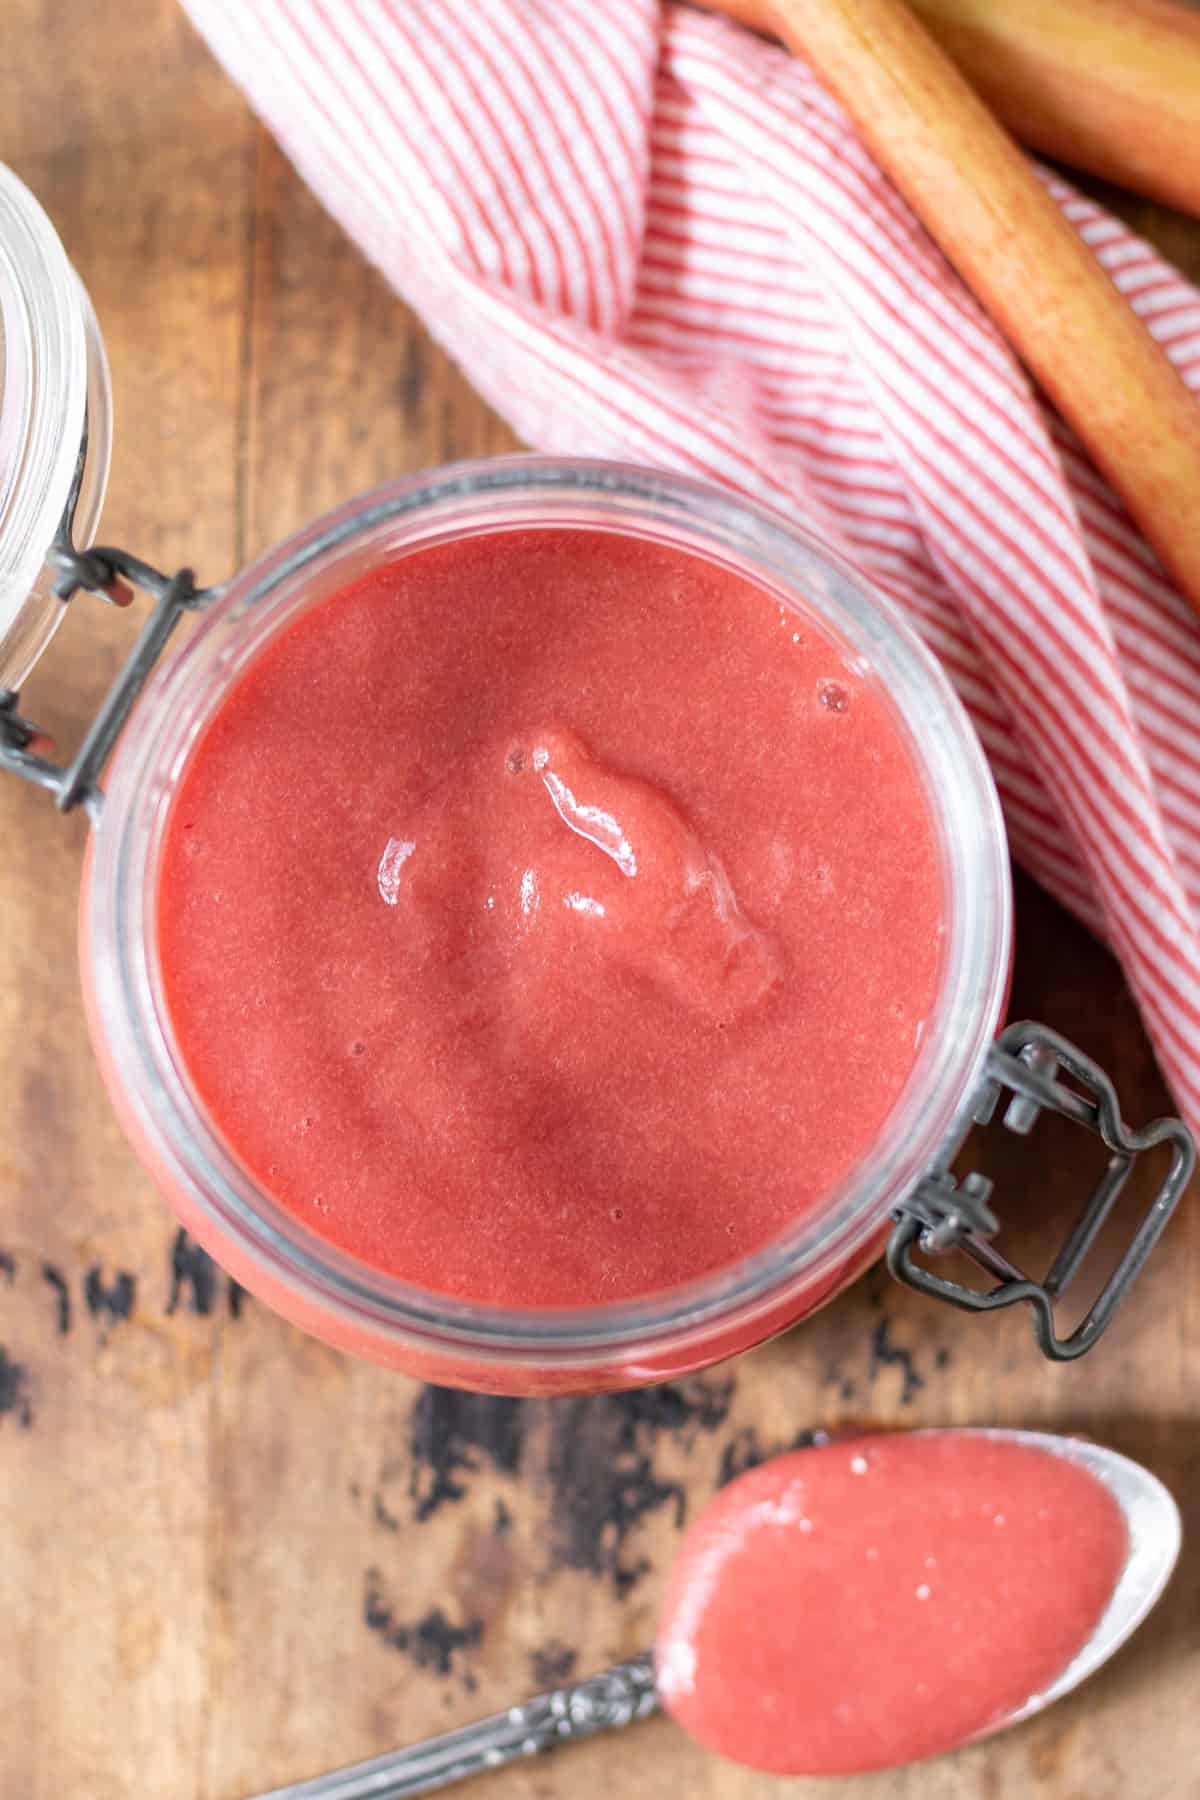 Looking down into a jar of sauce.